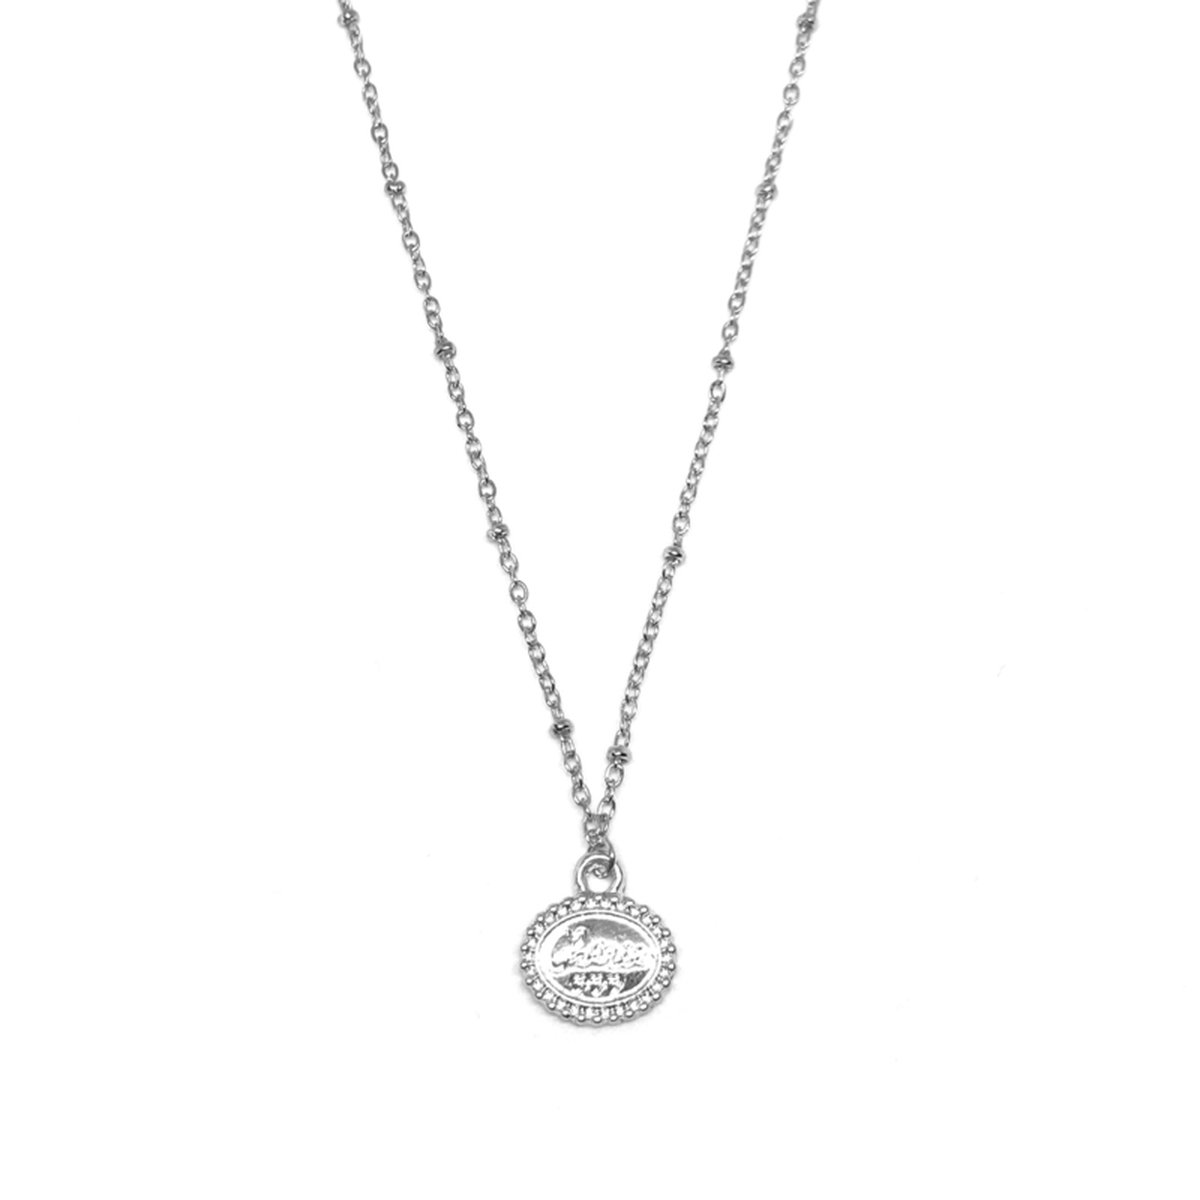 Cherie necklace - silver